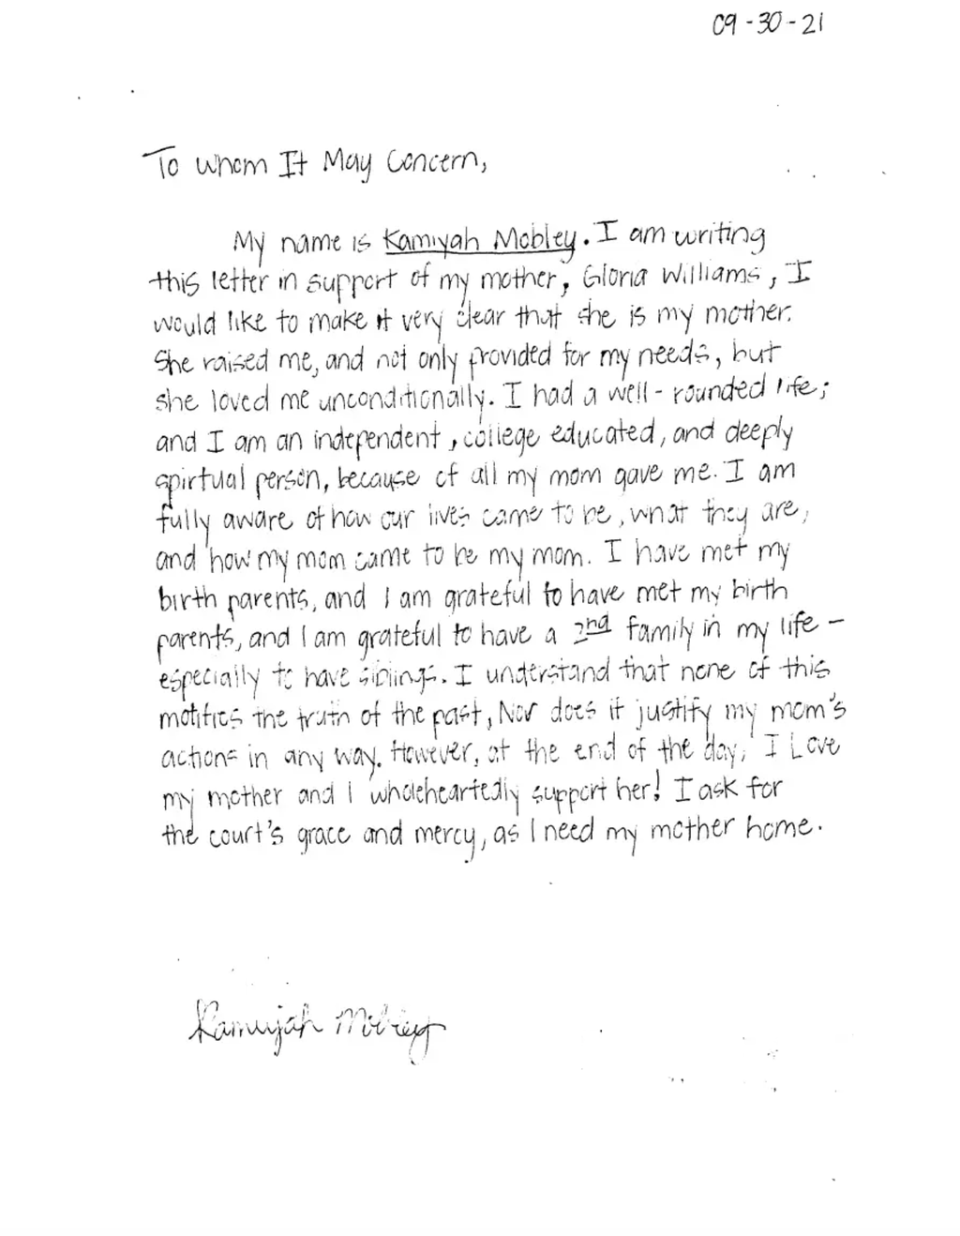 Kamiyah Mobley pleads for her kidnapper, Gloria Williams’ early release in a handwritten letter to the court (Circuit Court of the Fourth Judicial Circuit in and for Duval County, Florida)